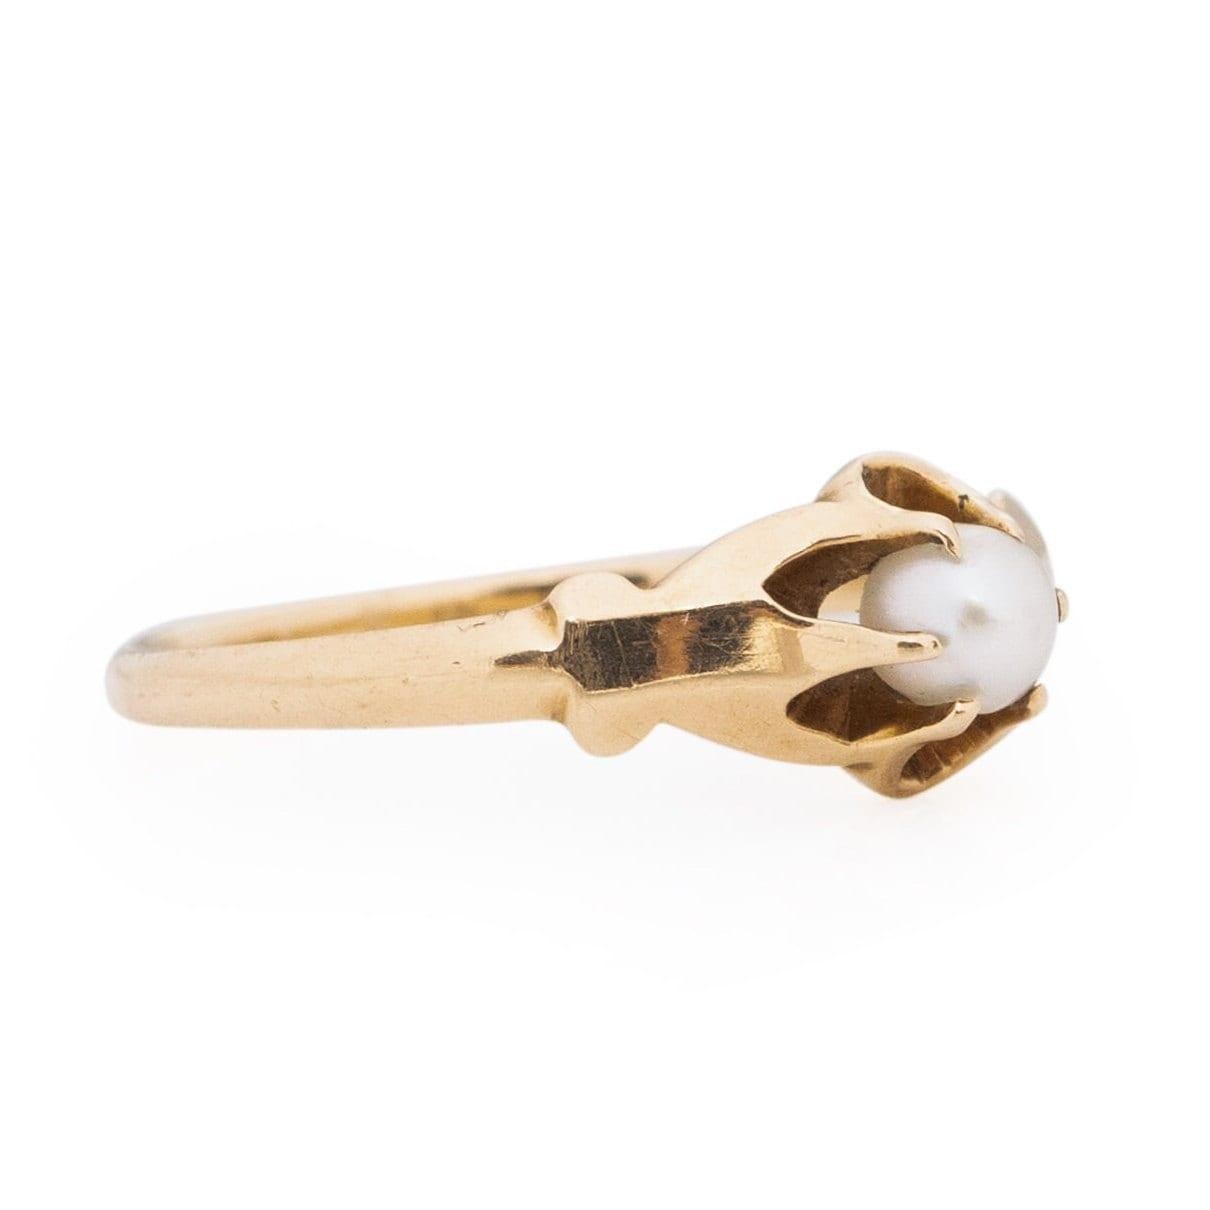 Here we have a cute solitaire pearl, belcher style from the Victorian era. This dainty piece is crafted in 14K yellow gold with very minimal detail, this allows the focus to be the pearl center. The small tapering details of the shank lead to the